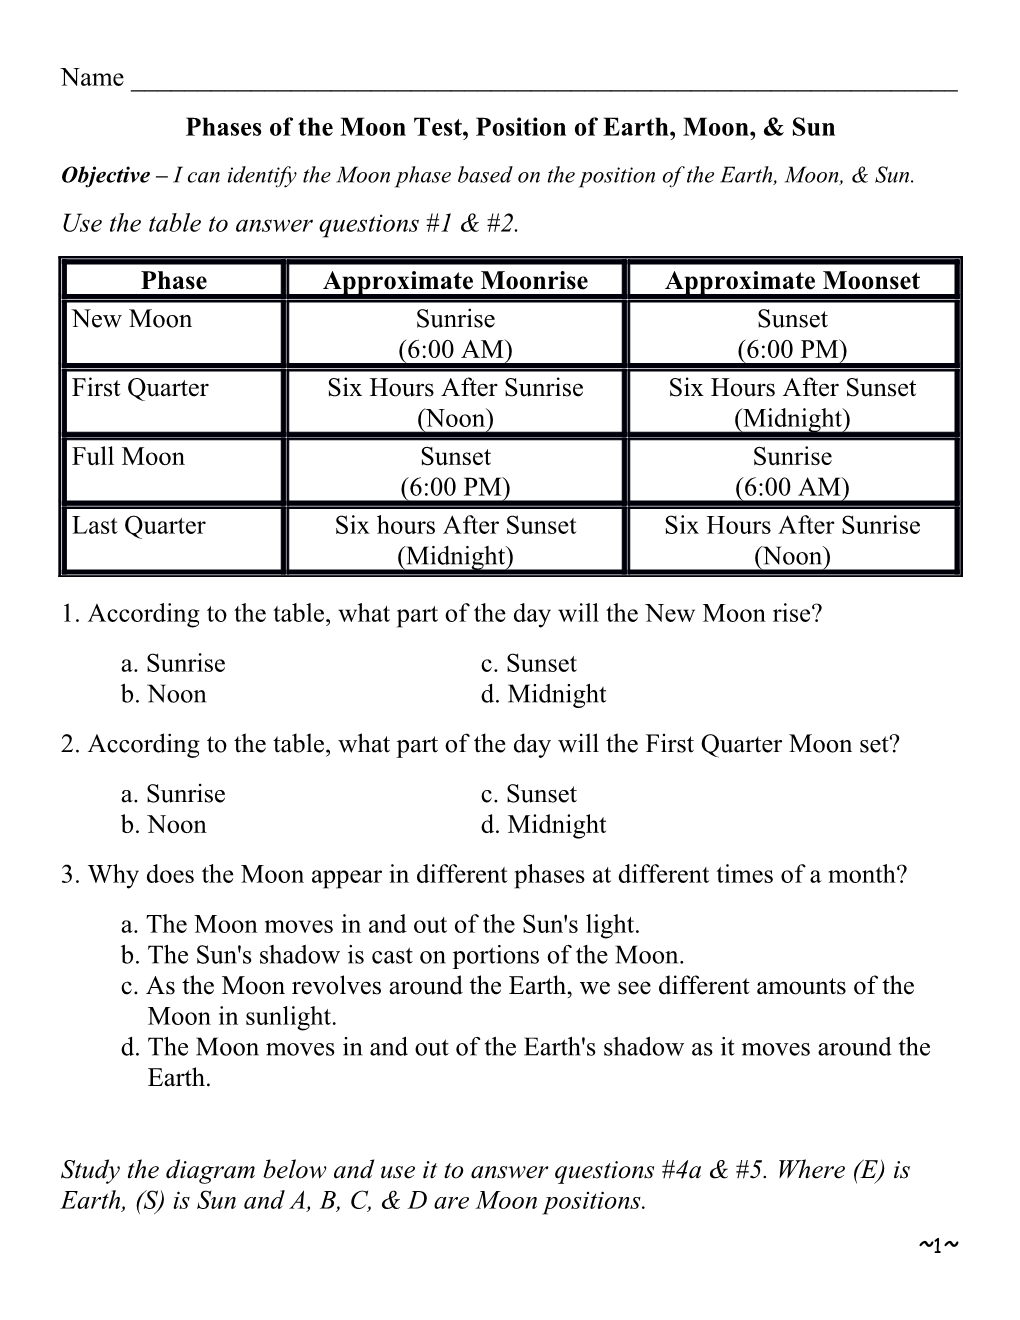 Phases of the Moon Test, Position of Earth, Moon, & Sun